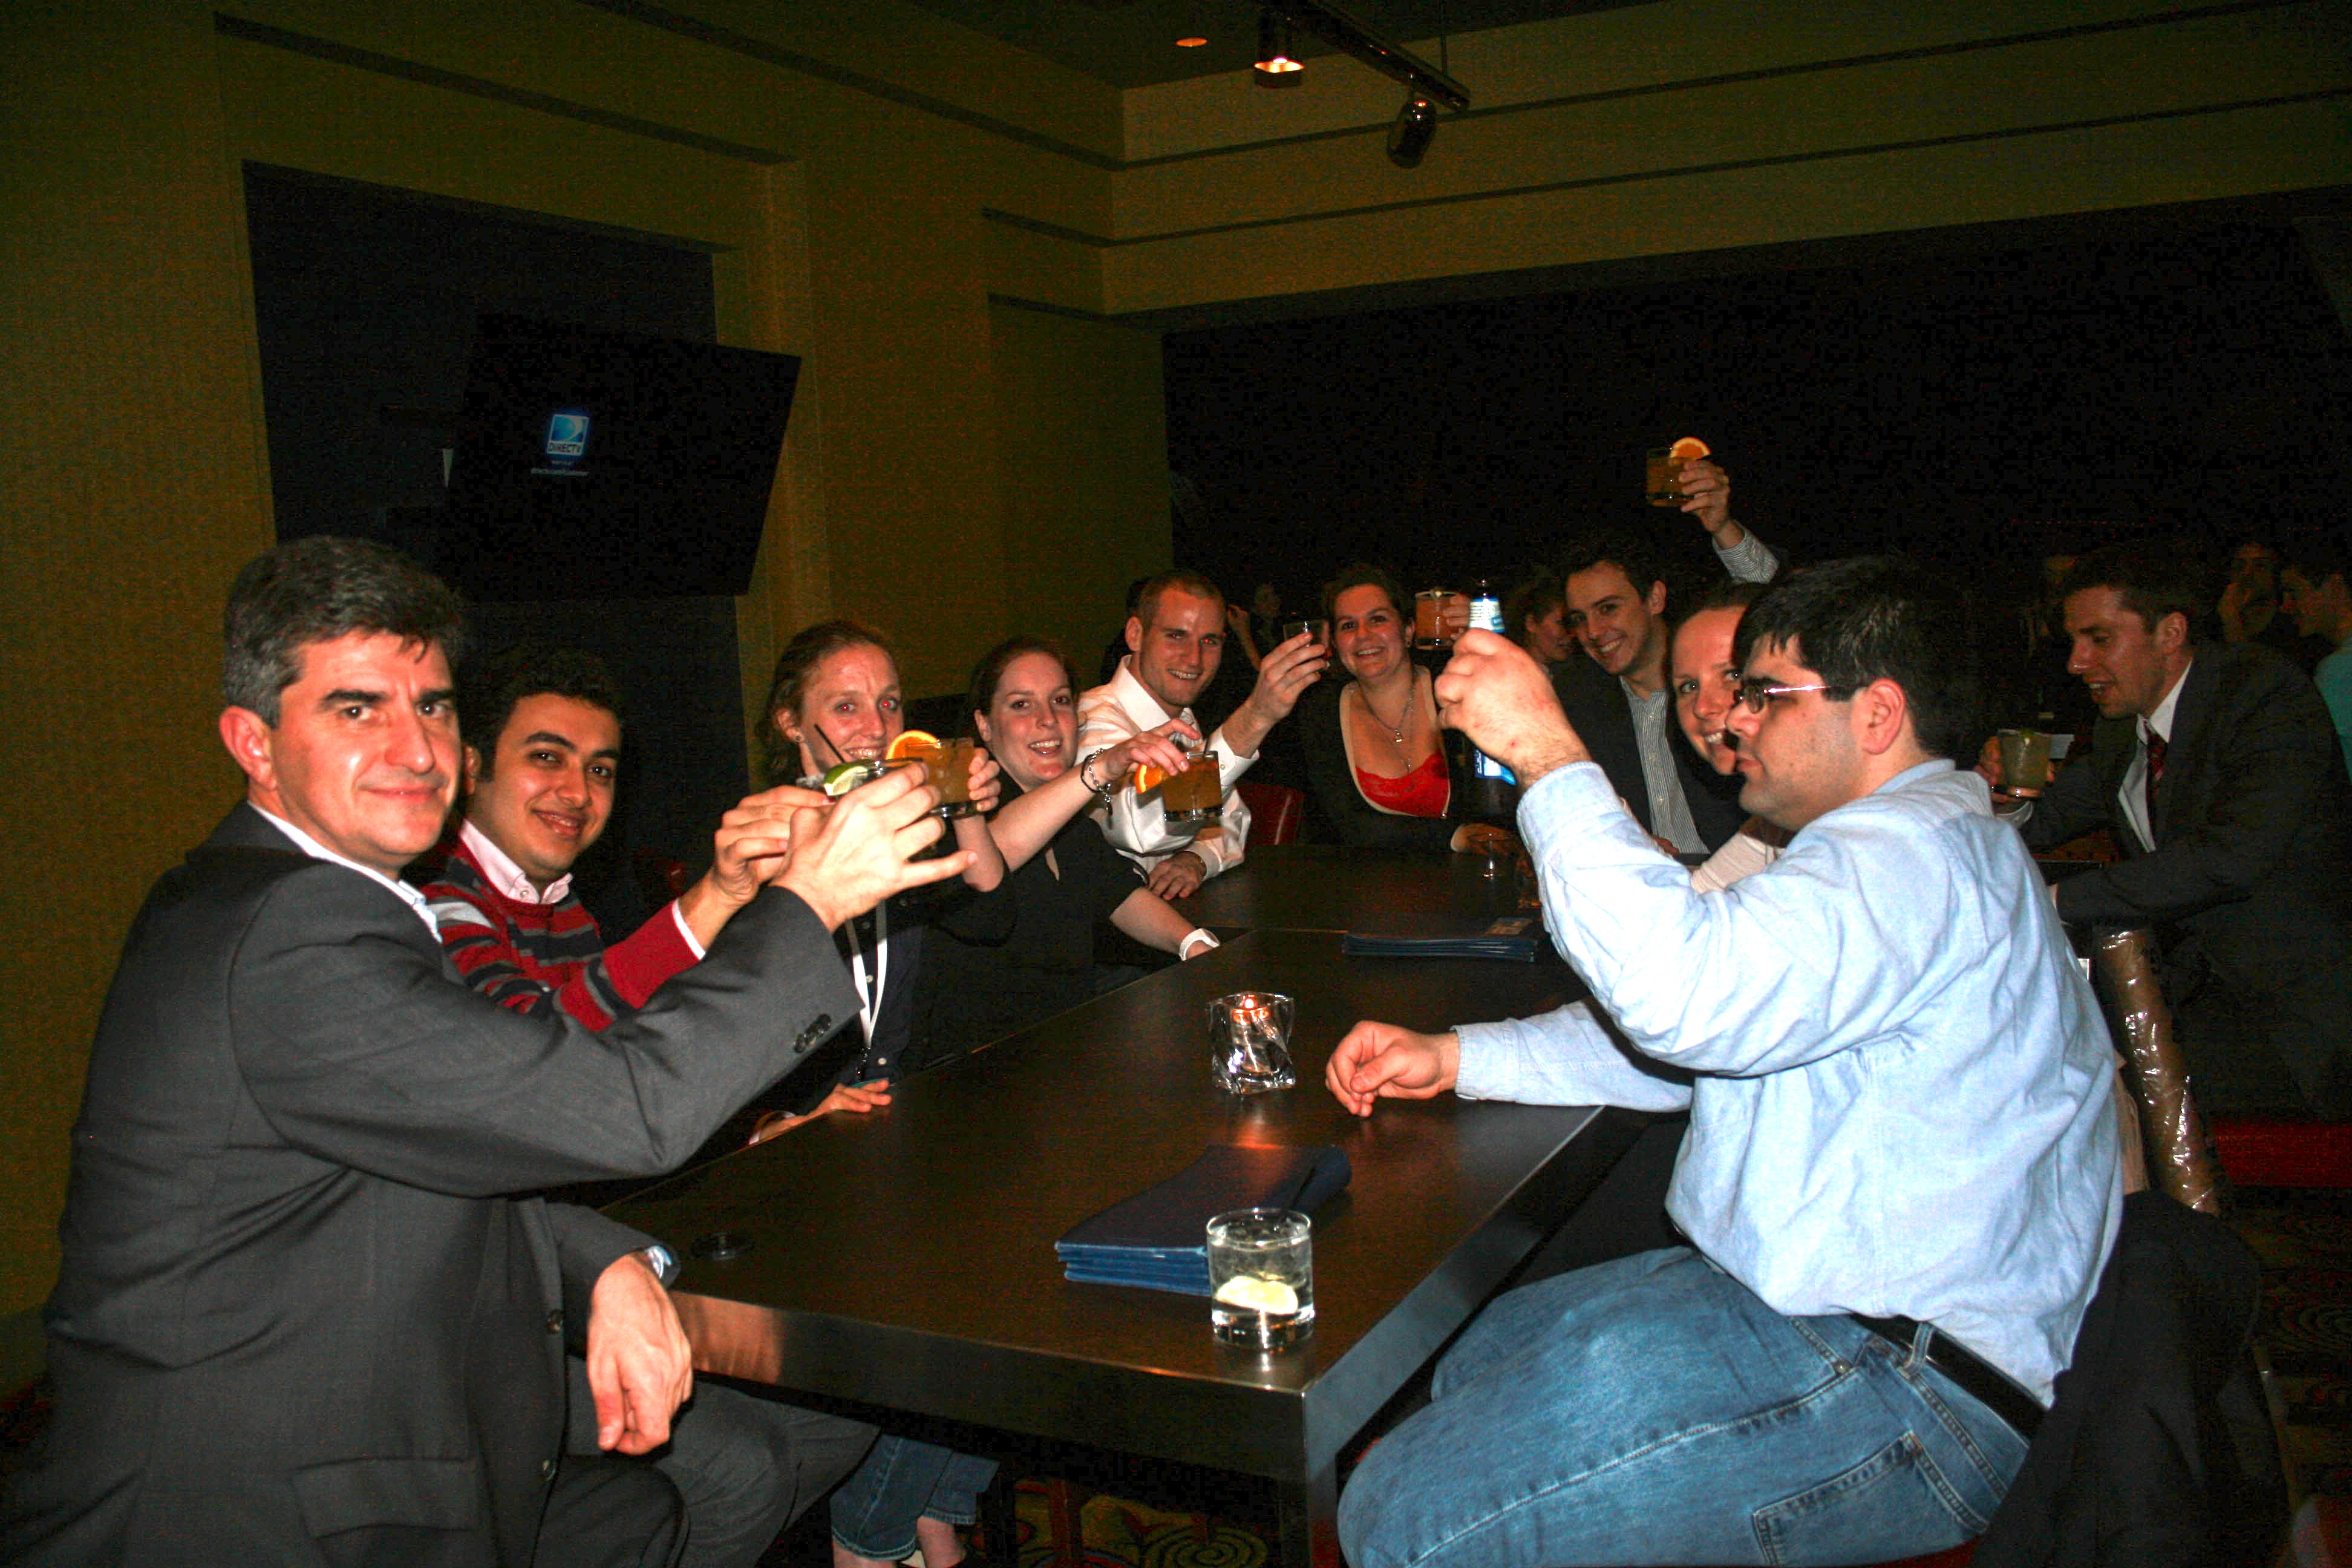 Members of the Nanomaterials Group toast a successful MRS meeting